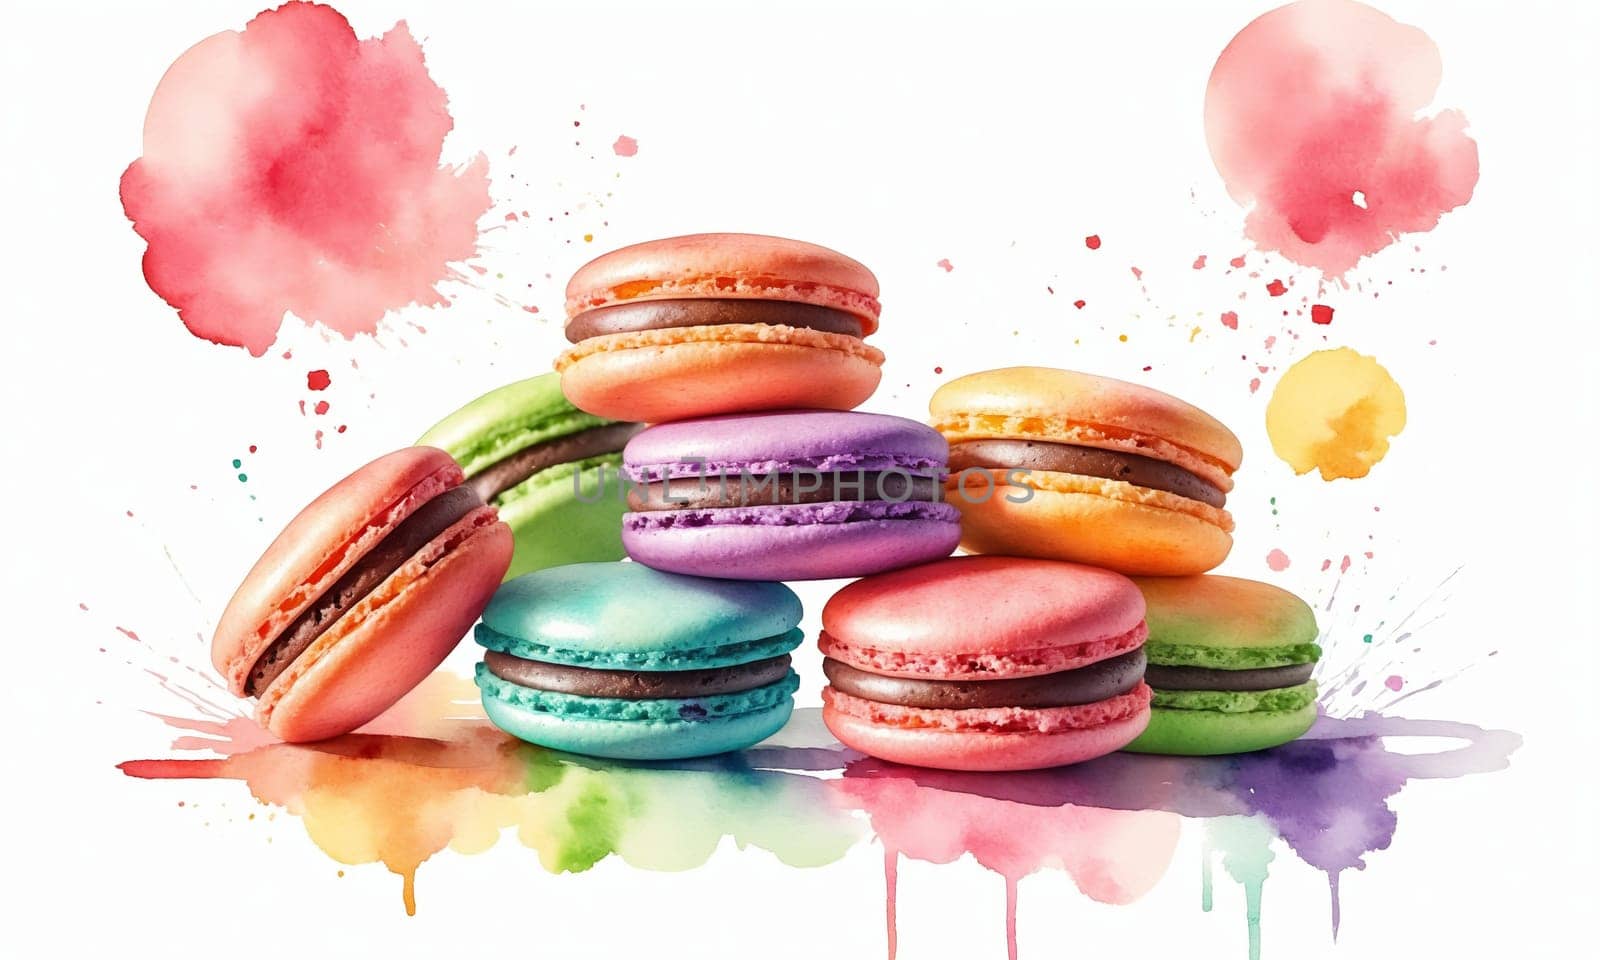 Colorful macaroons with watercolor splashes on white background by Andre1ns